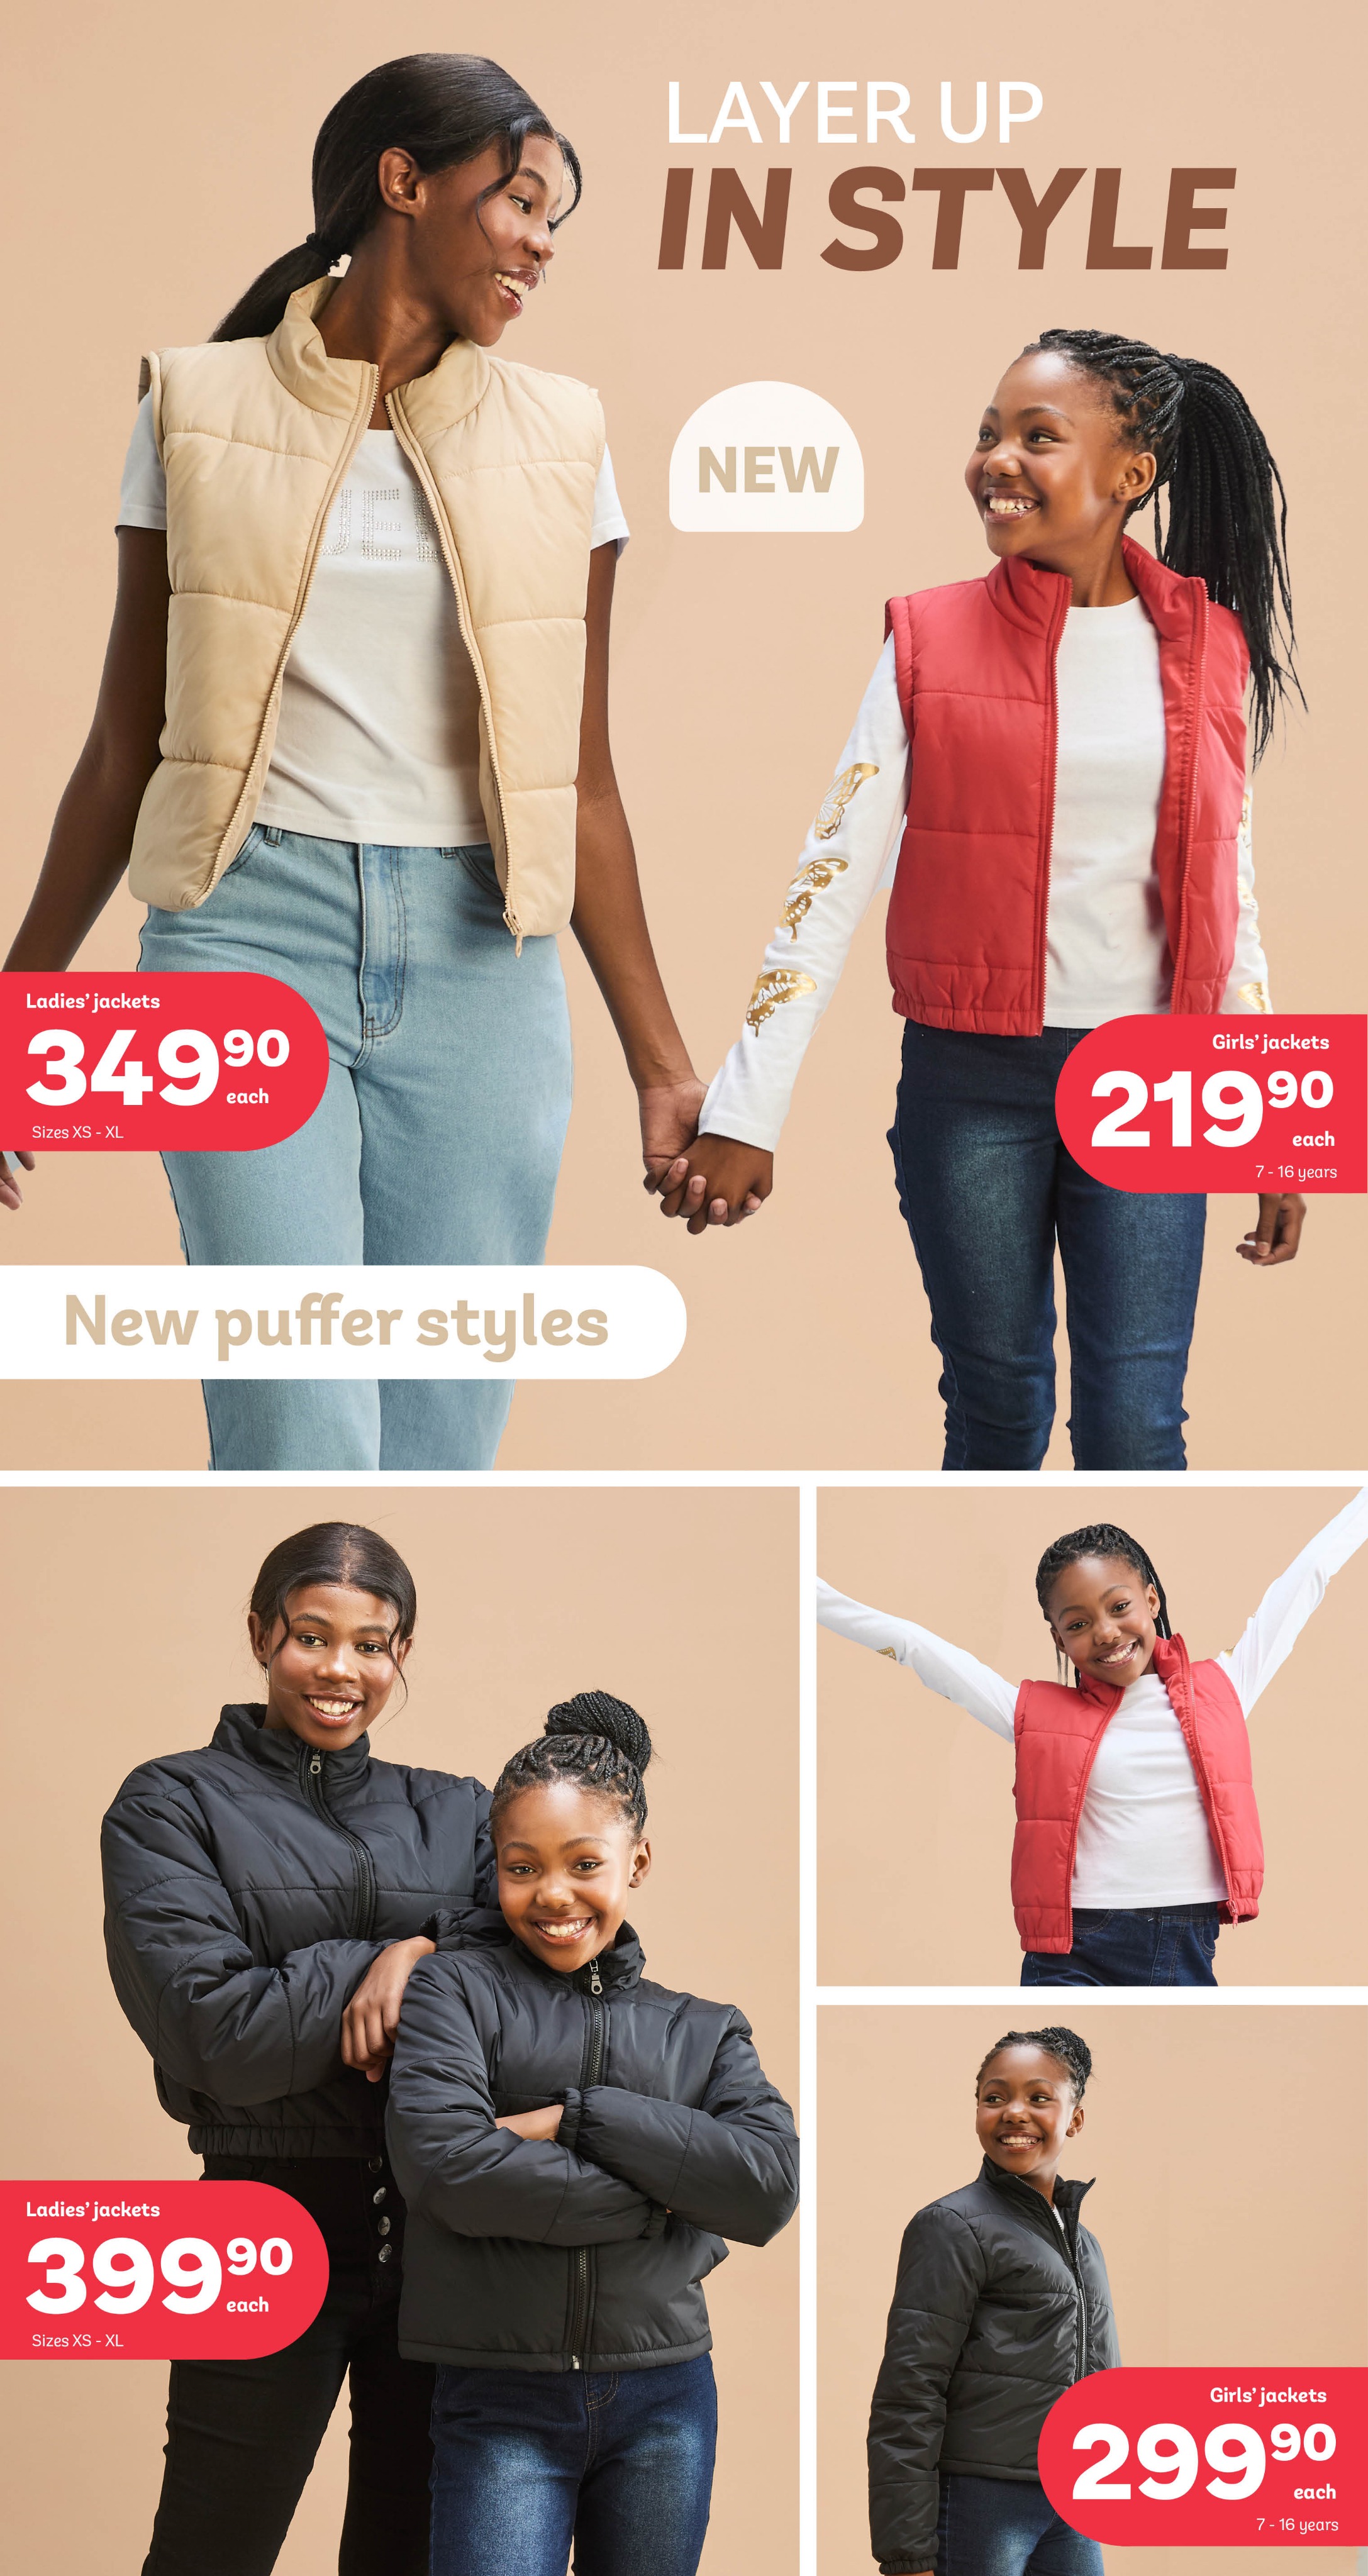 Stay Warm in Style - NEW Puffer Jackets for Girls and Ladies